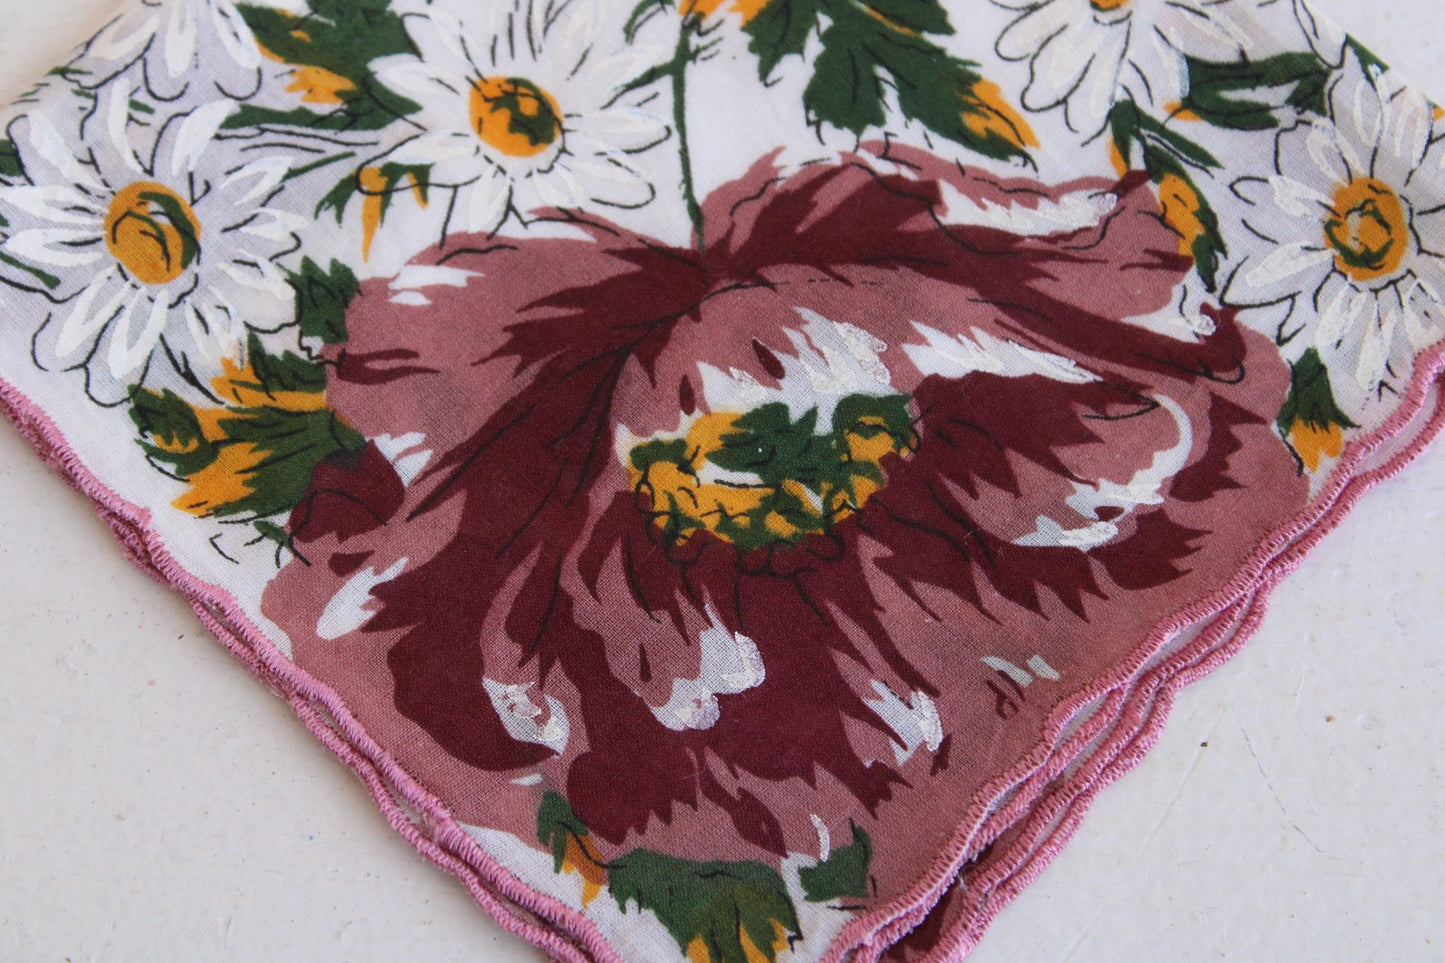 Vintage Brown, Yellow and White Flower Print Cotton Hanky